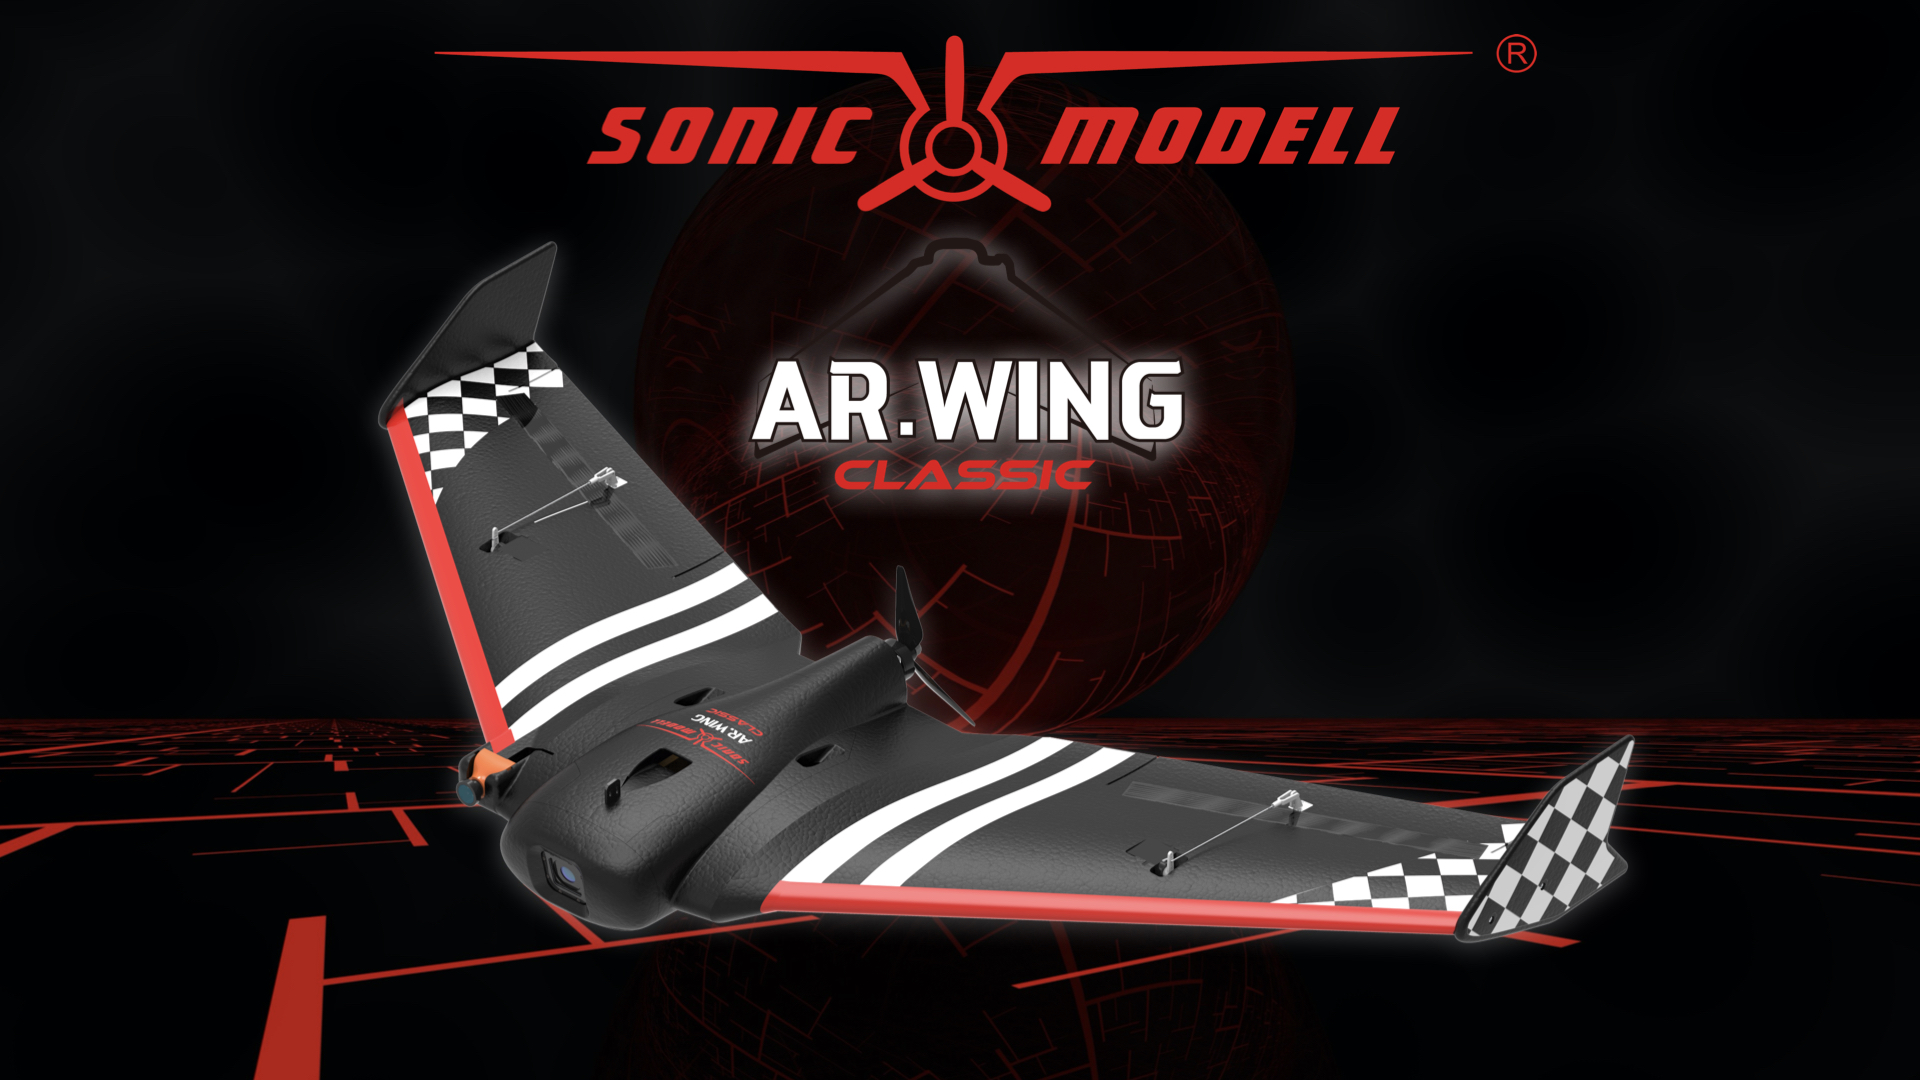 Sonicmodell AR WING CLASSIC 900mm Wingspan EPP FPV Flying Wing RC Airplane Unassembled KIT PNP